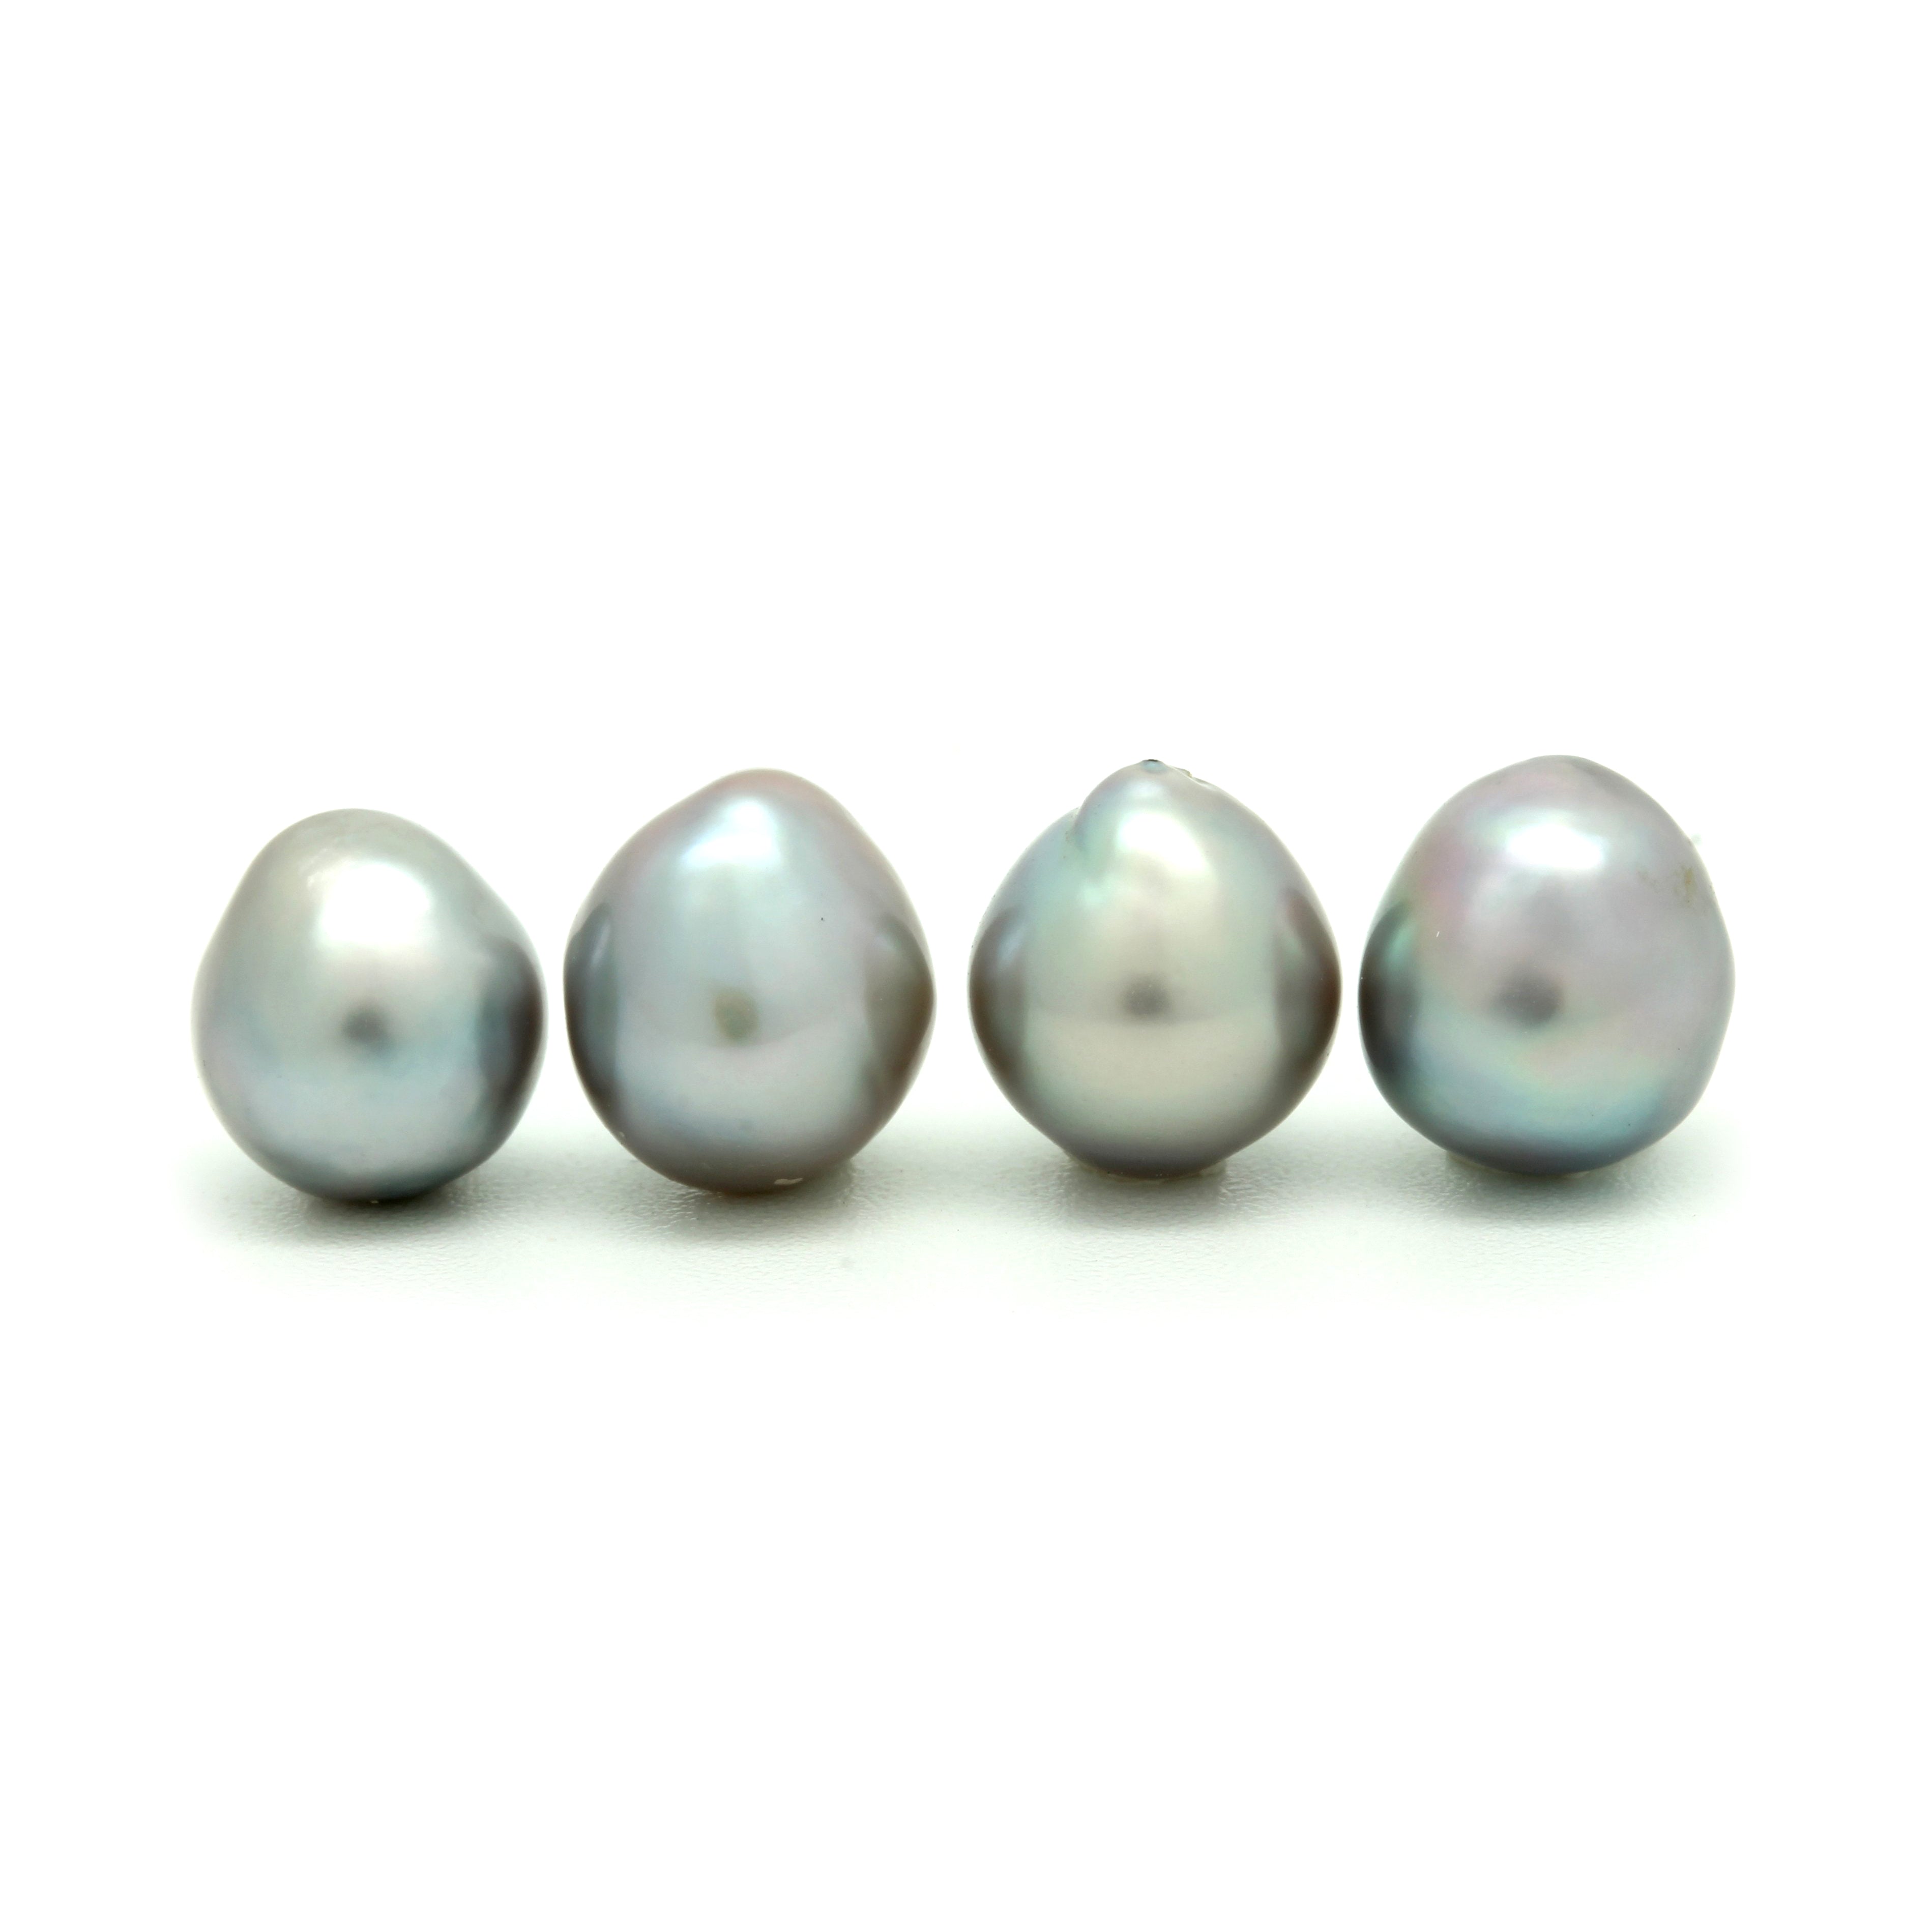 Lot of 4 Baroque Cortez Pearls from 2019 HARVEST